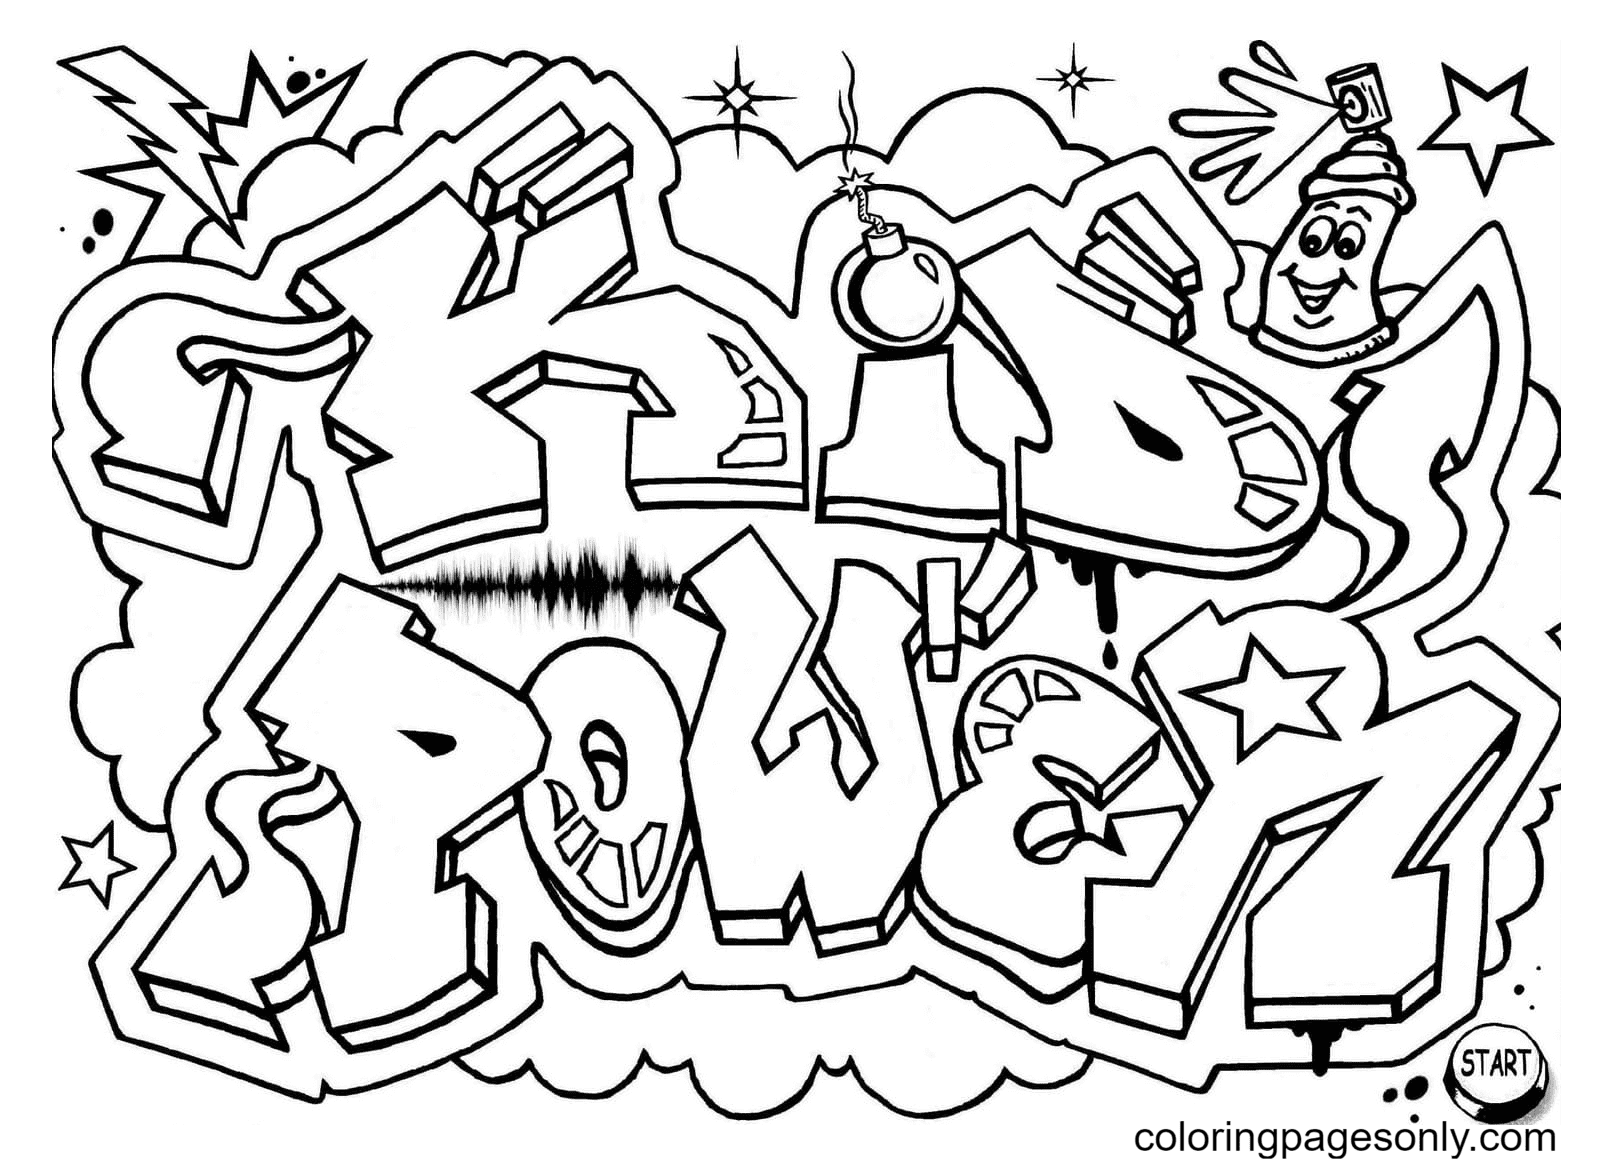 Kid power Coloring Pages